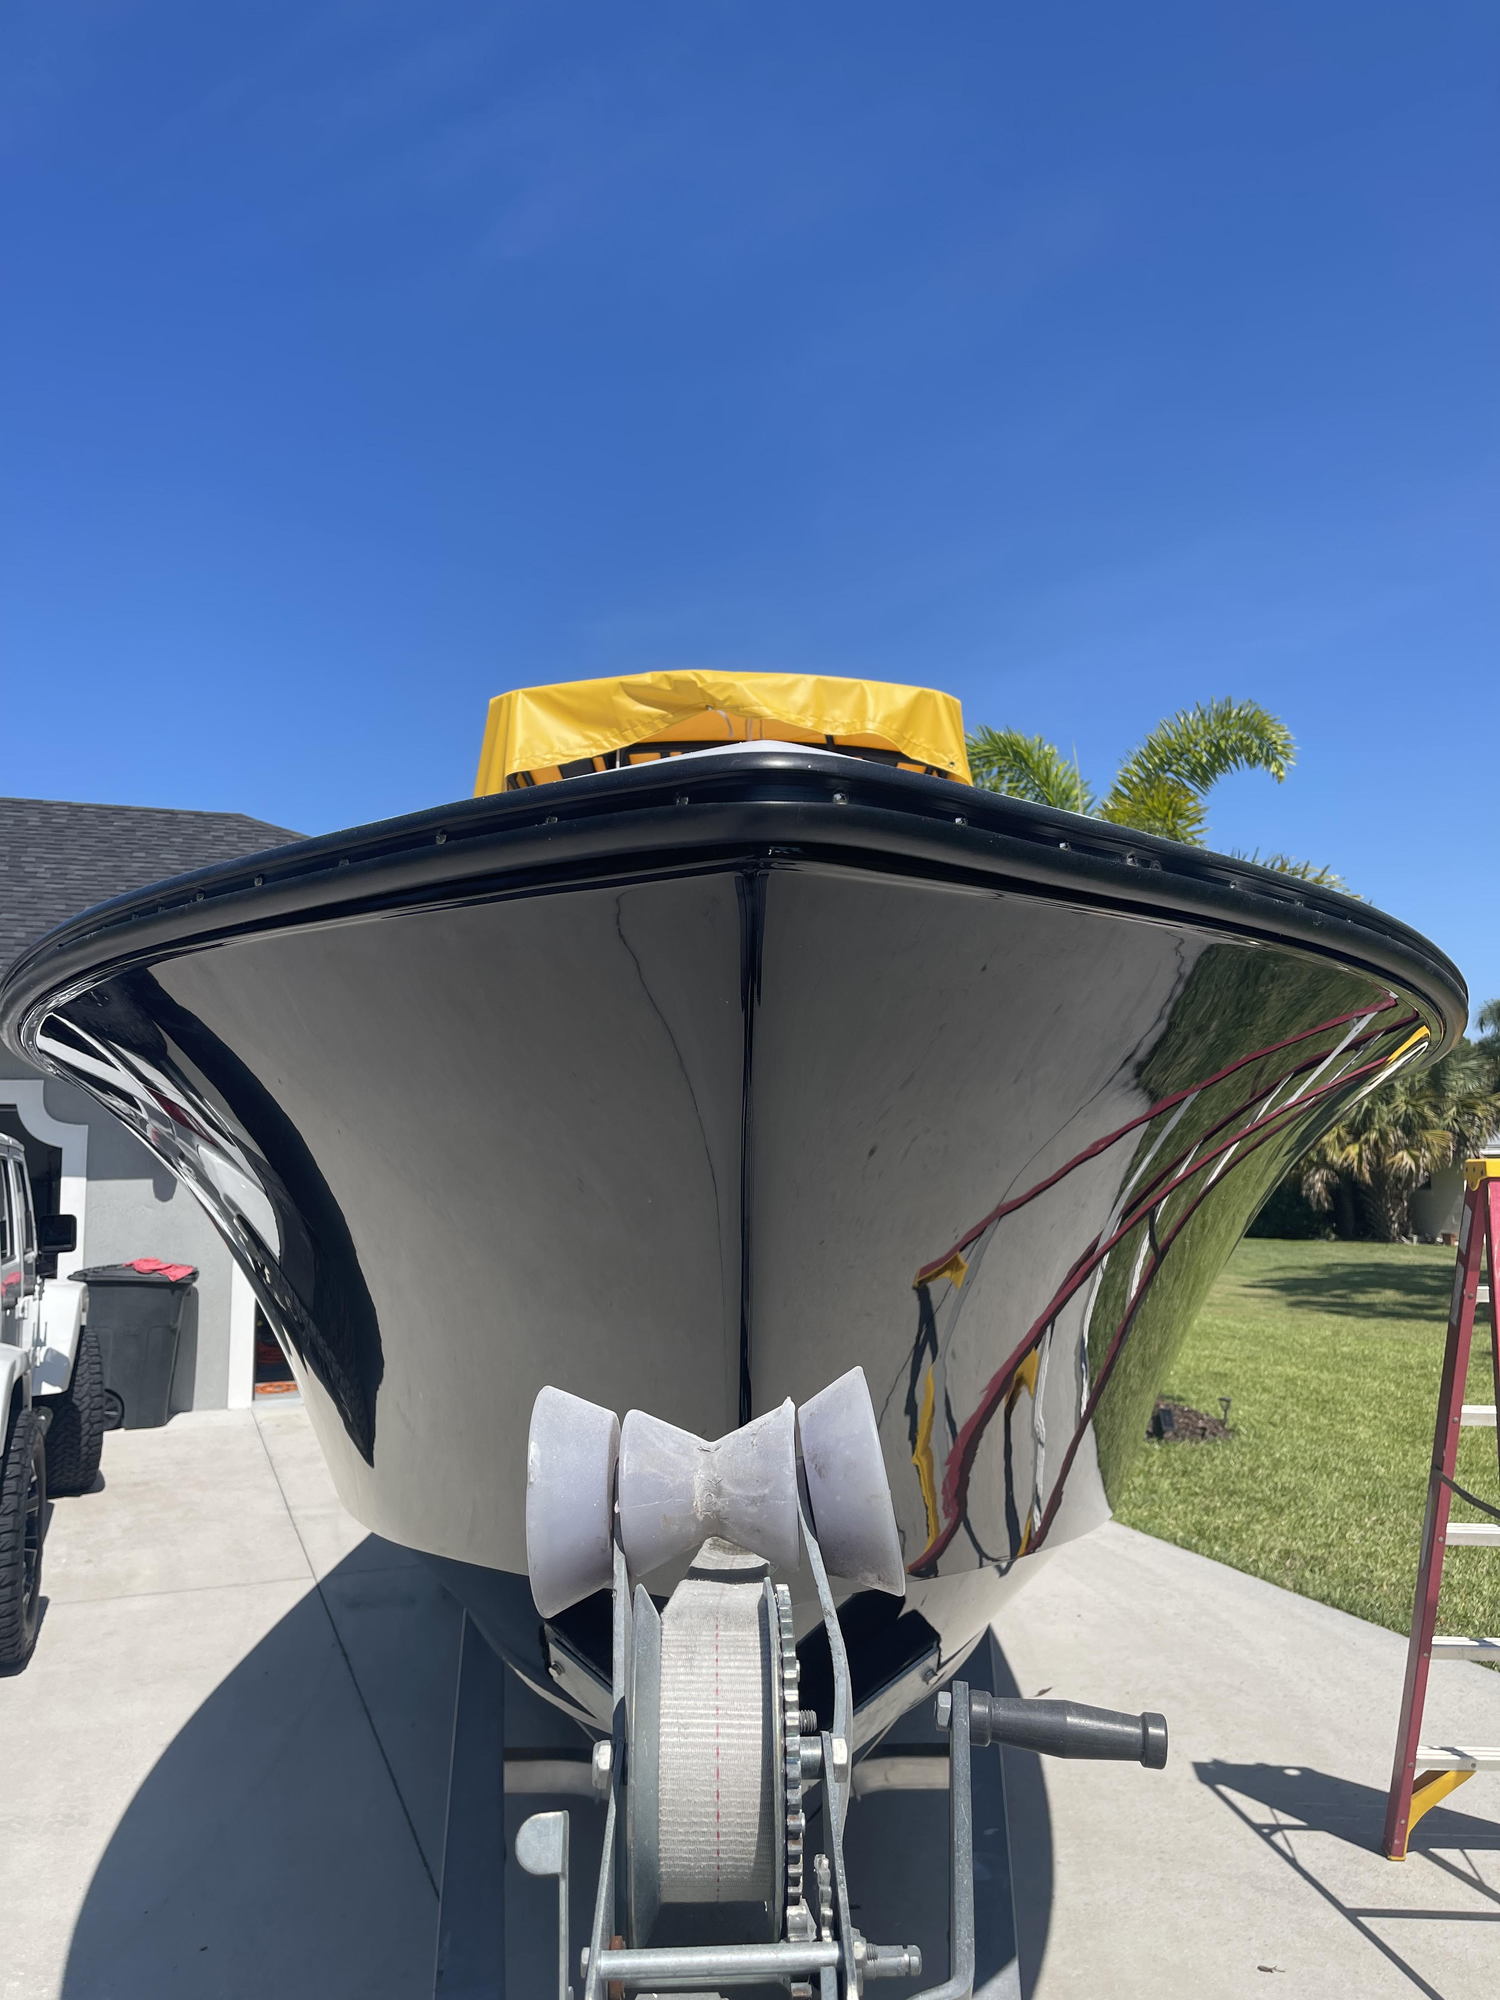 Best Way to Attach Flat-Line Clips to GW 272? - The Hull Truth